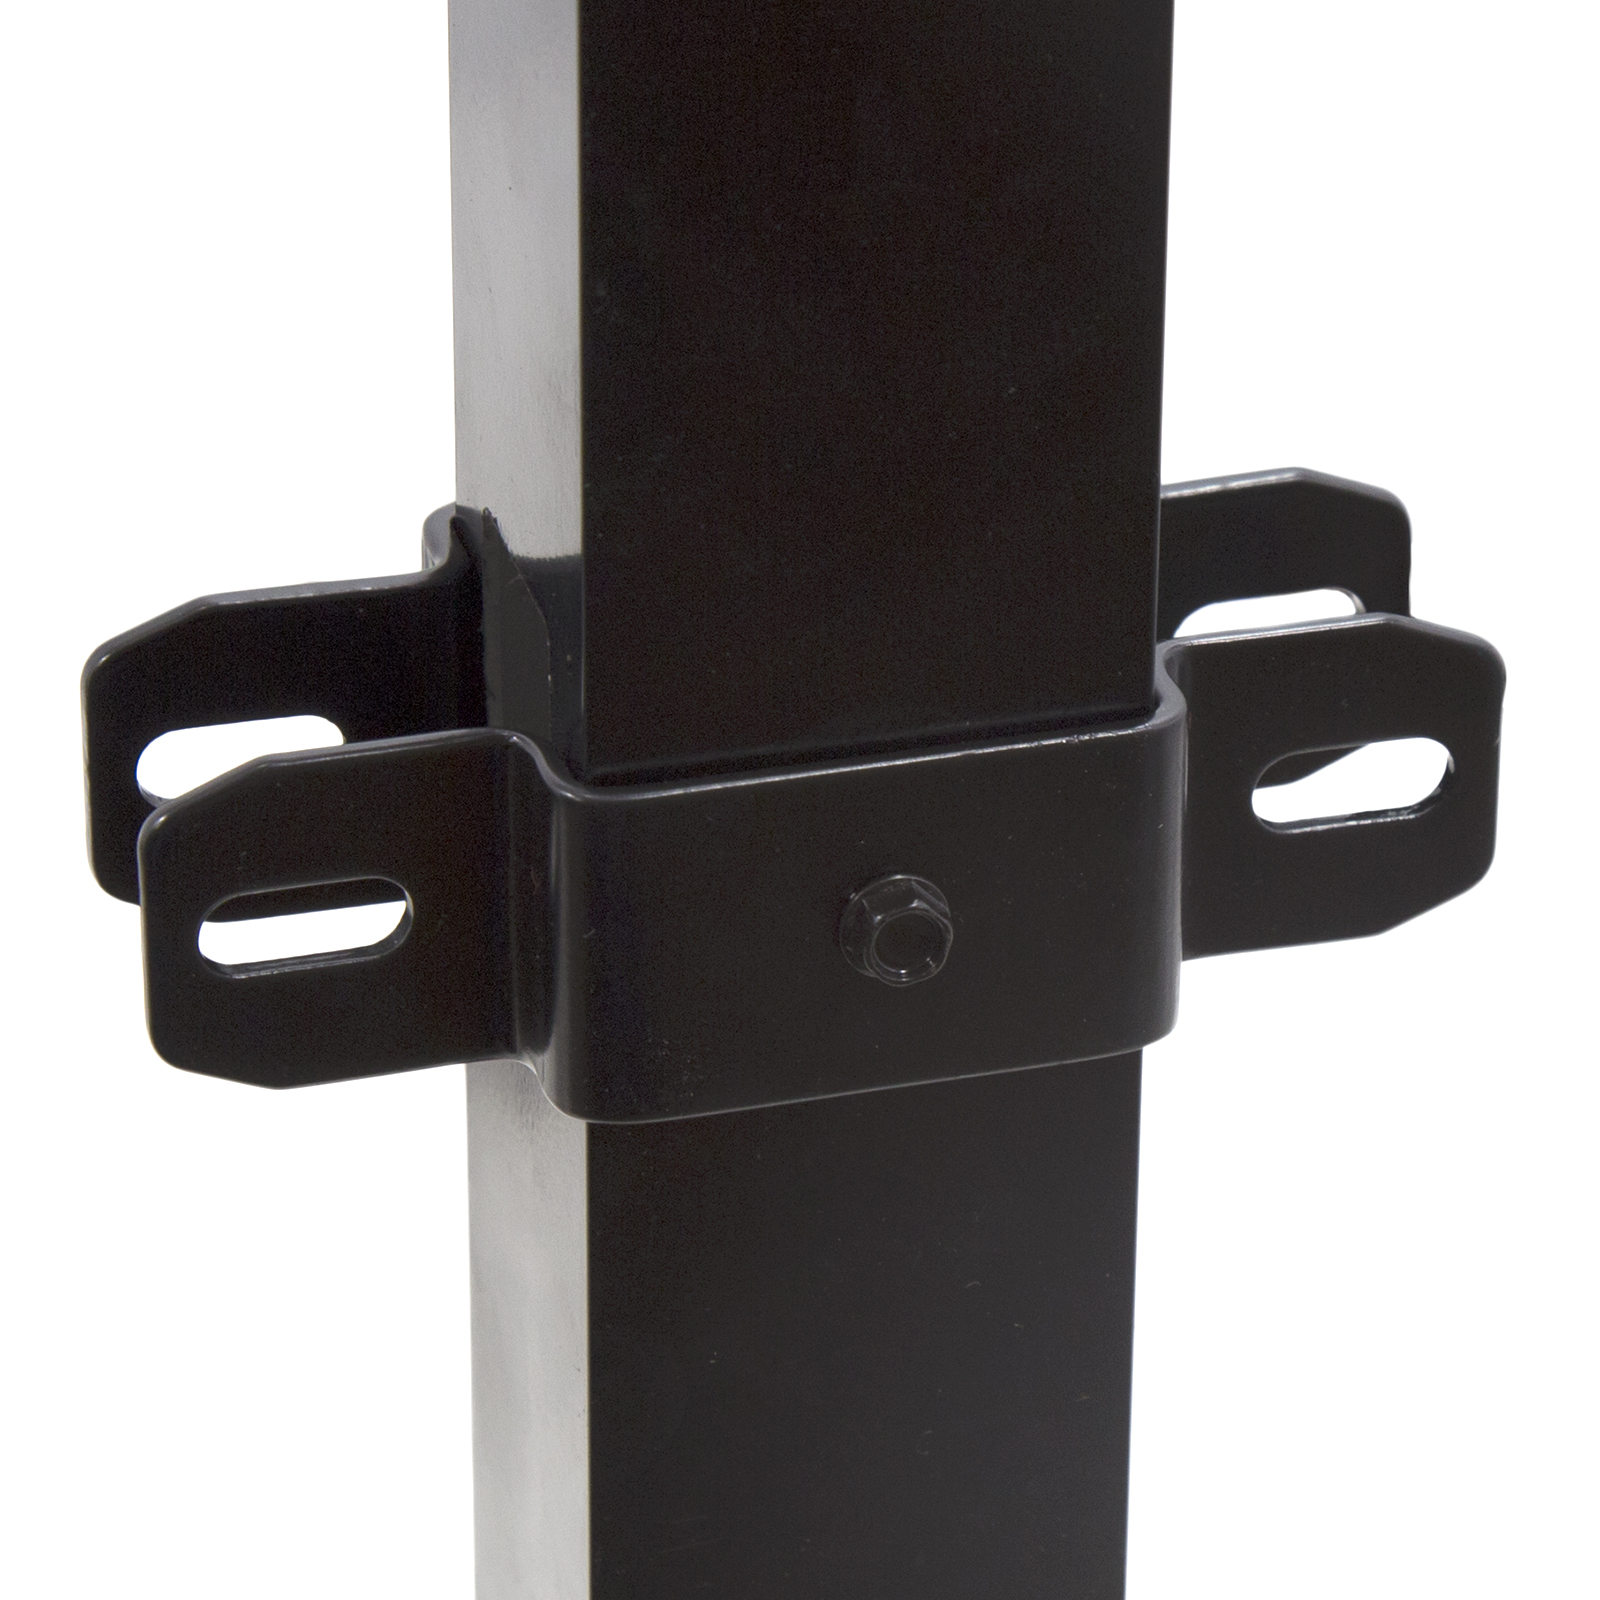 Black Post Bracket for Wrought Iron Fence